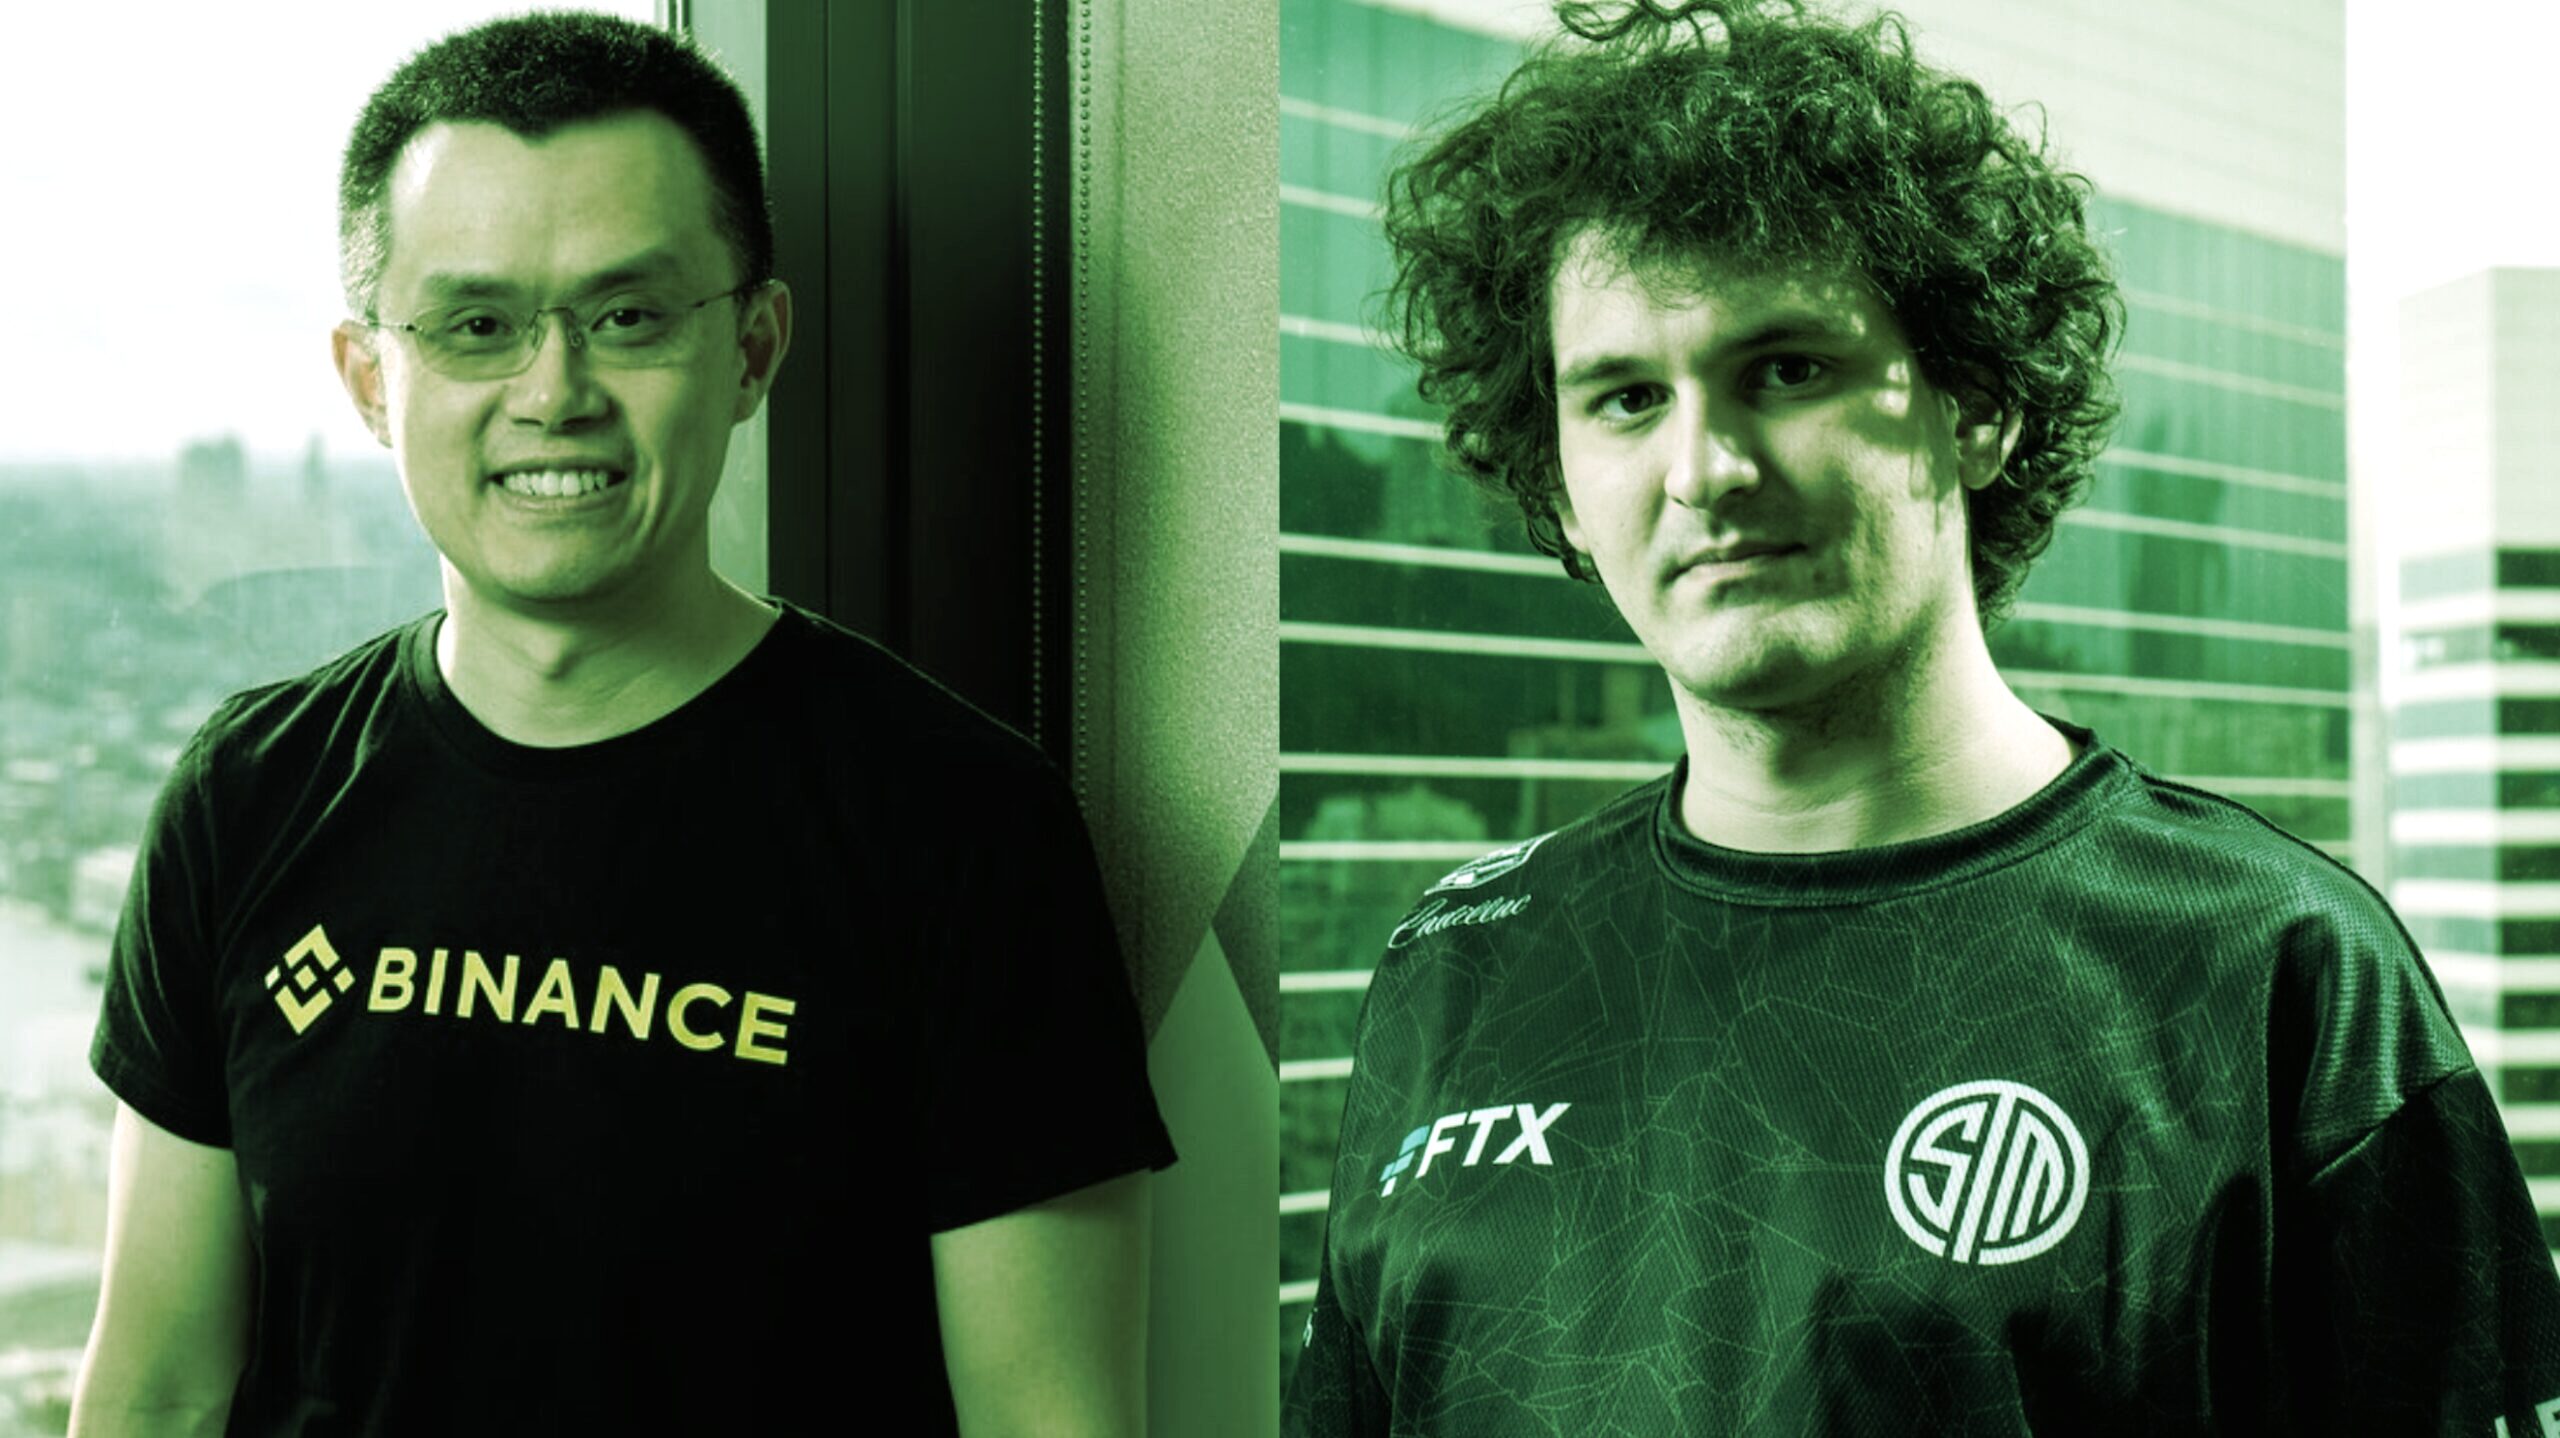 Binance Eyes $1 Billion Raise for Crypto 'Recovery Fund', Could Buy FTX Assets